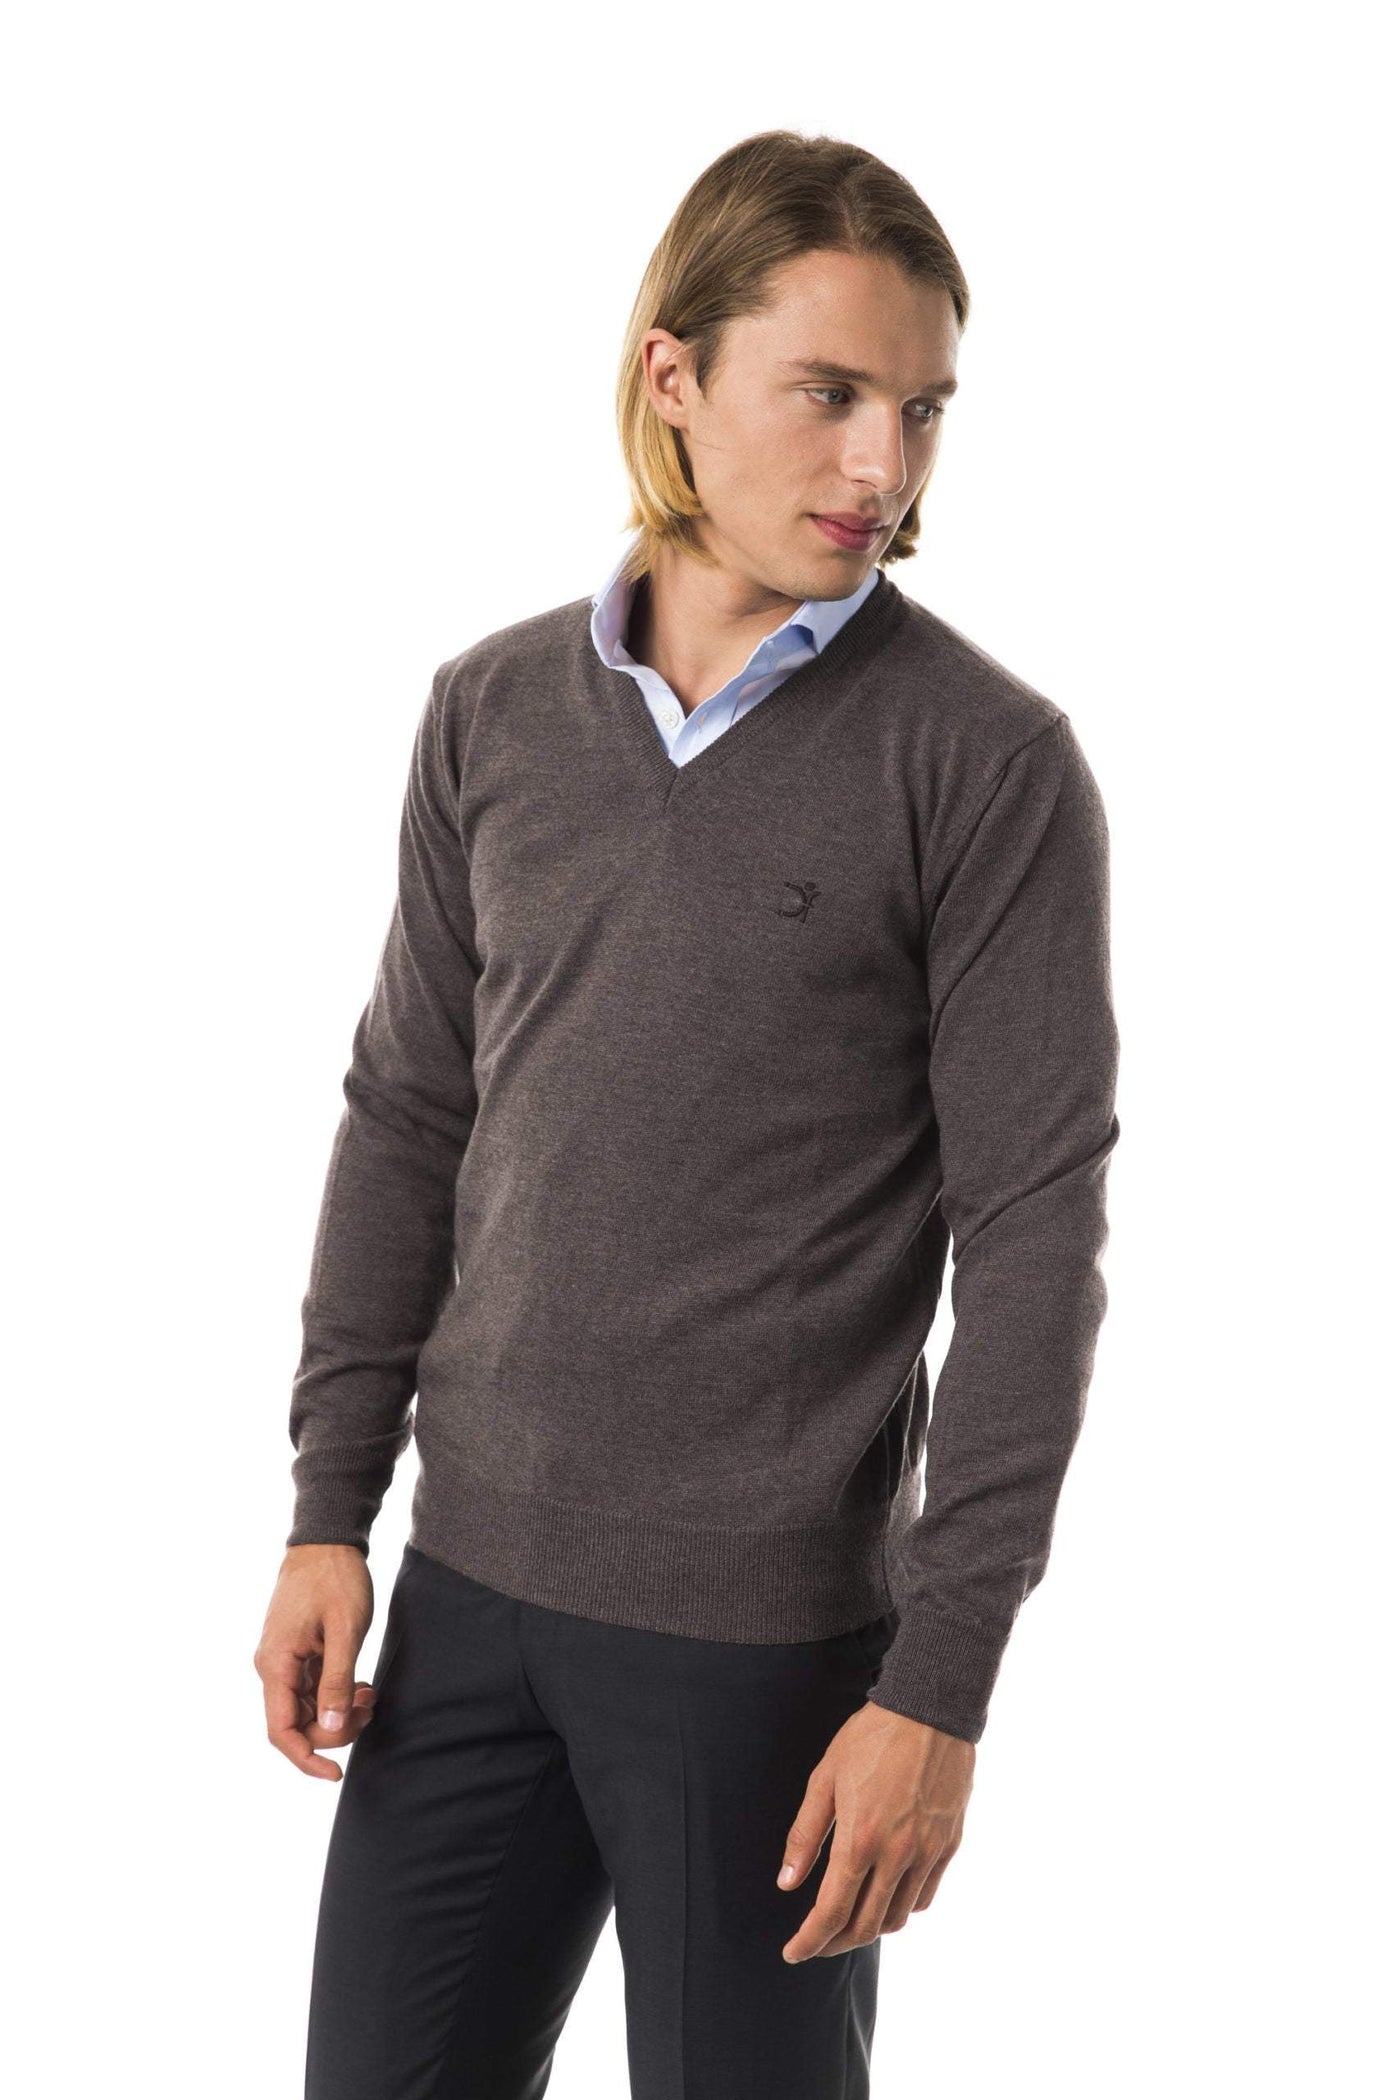 Uominitaliani v-neck emroidered Sweater #men, feed-color-Gray, feed-gender-adult, feed-gender-male, Gray, L, M, S, Sweaters - Men - Clothing, Uominitaliani, XL, XXL at SEYMAYKA